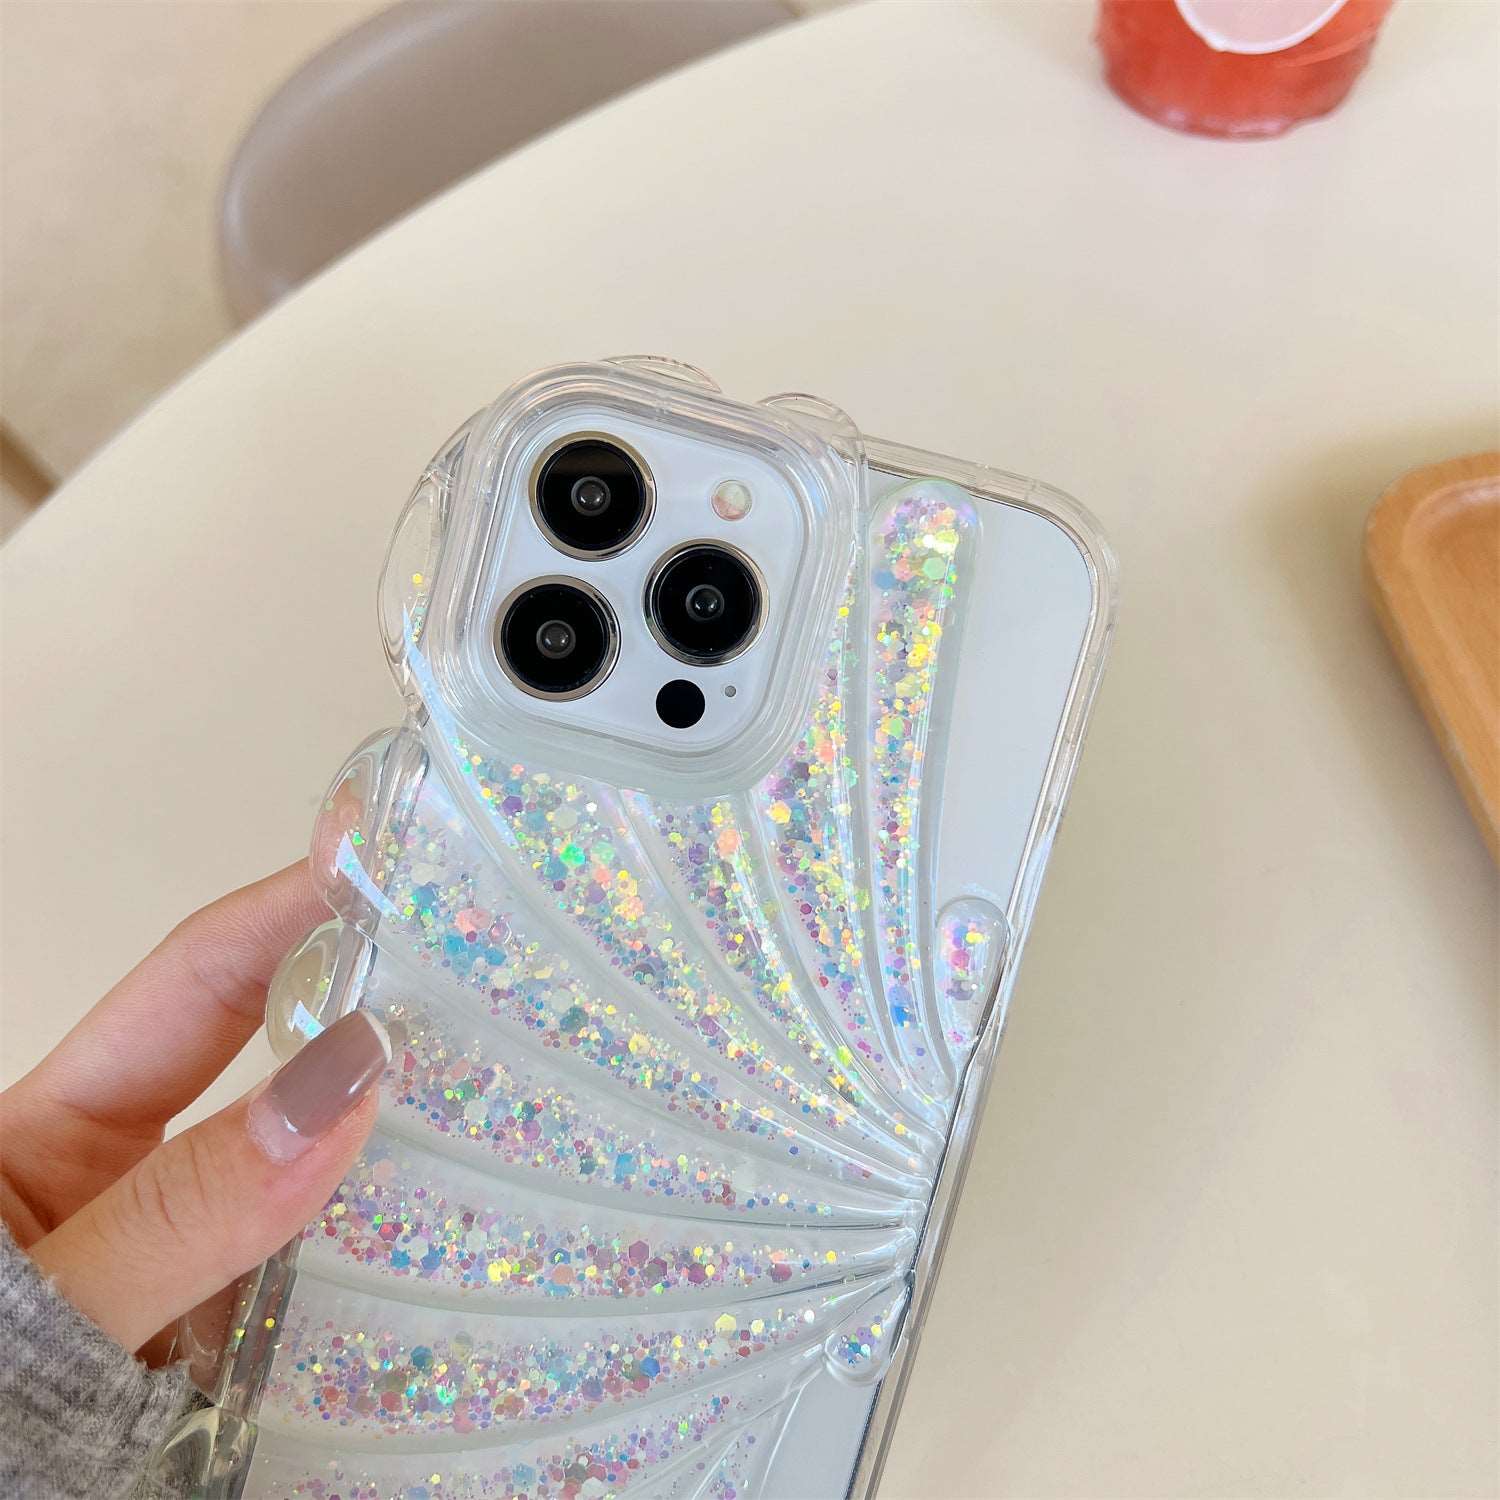 Shiny Bling Bling Shell iPhone Case for iPhone 11-15 Pro Max, Transparent Glitter Shell Phone Case for Women Girls, Coquette Aesthetics, Soft Feminine Style, Made of TPU, Available in 5 Colors